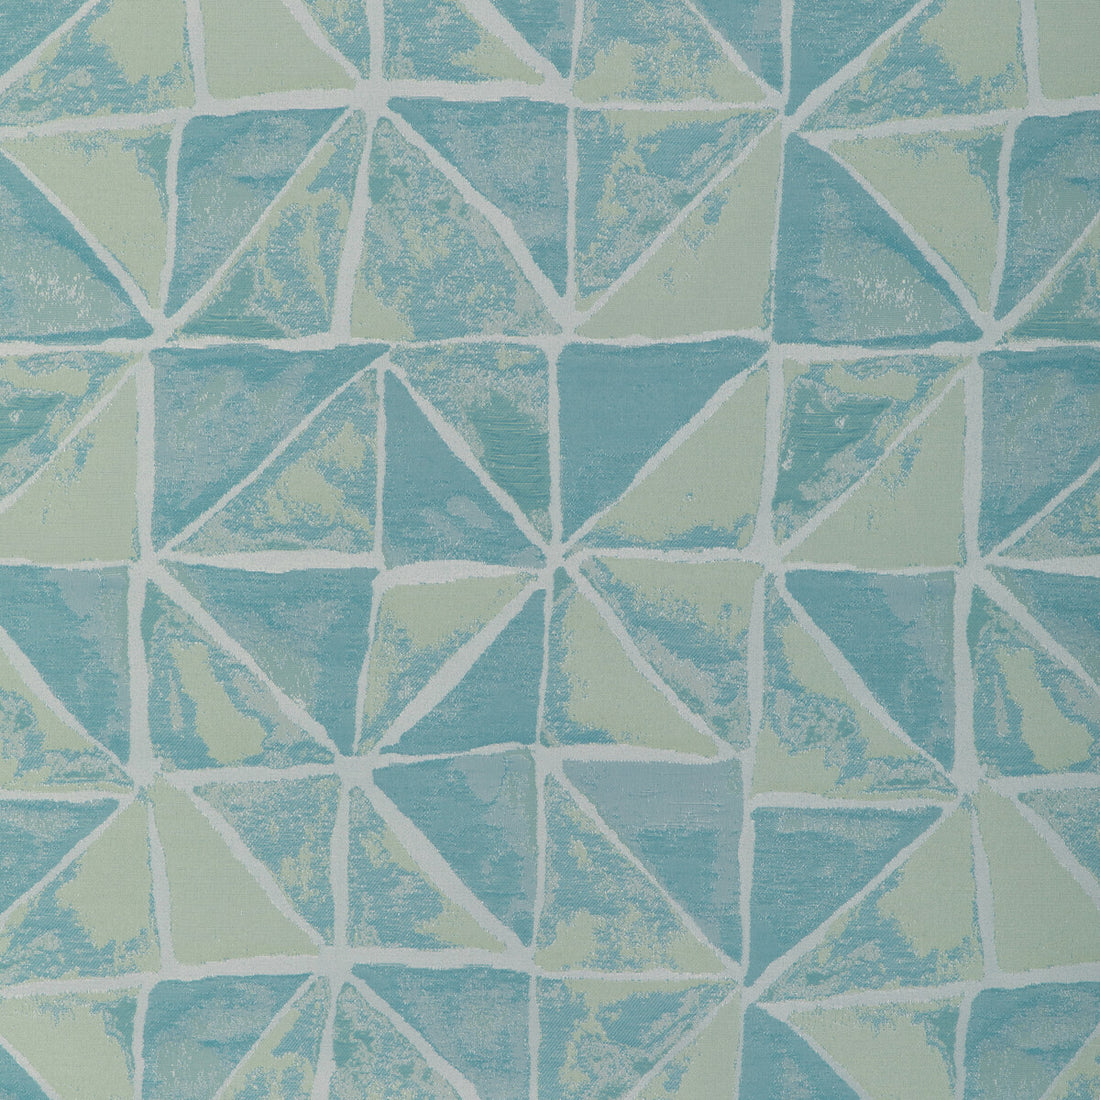 Looking Glass fabric in pool color - pattern 37076.353.0 - by Kravet Contract in the Chesapeake collection